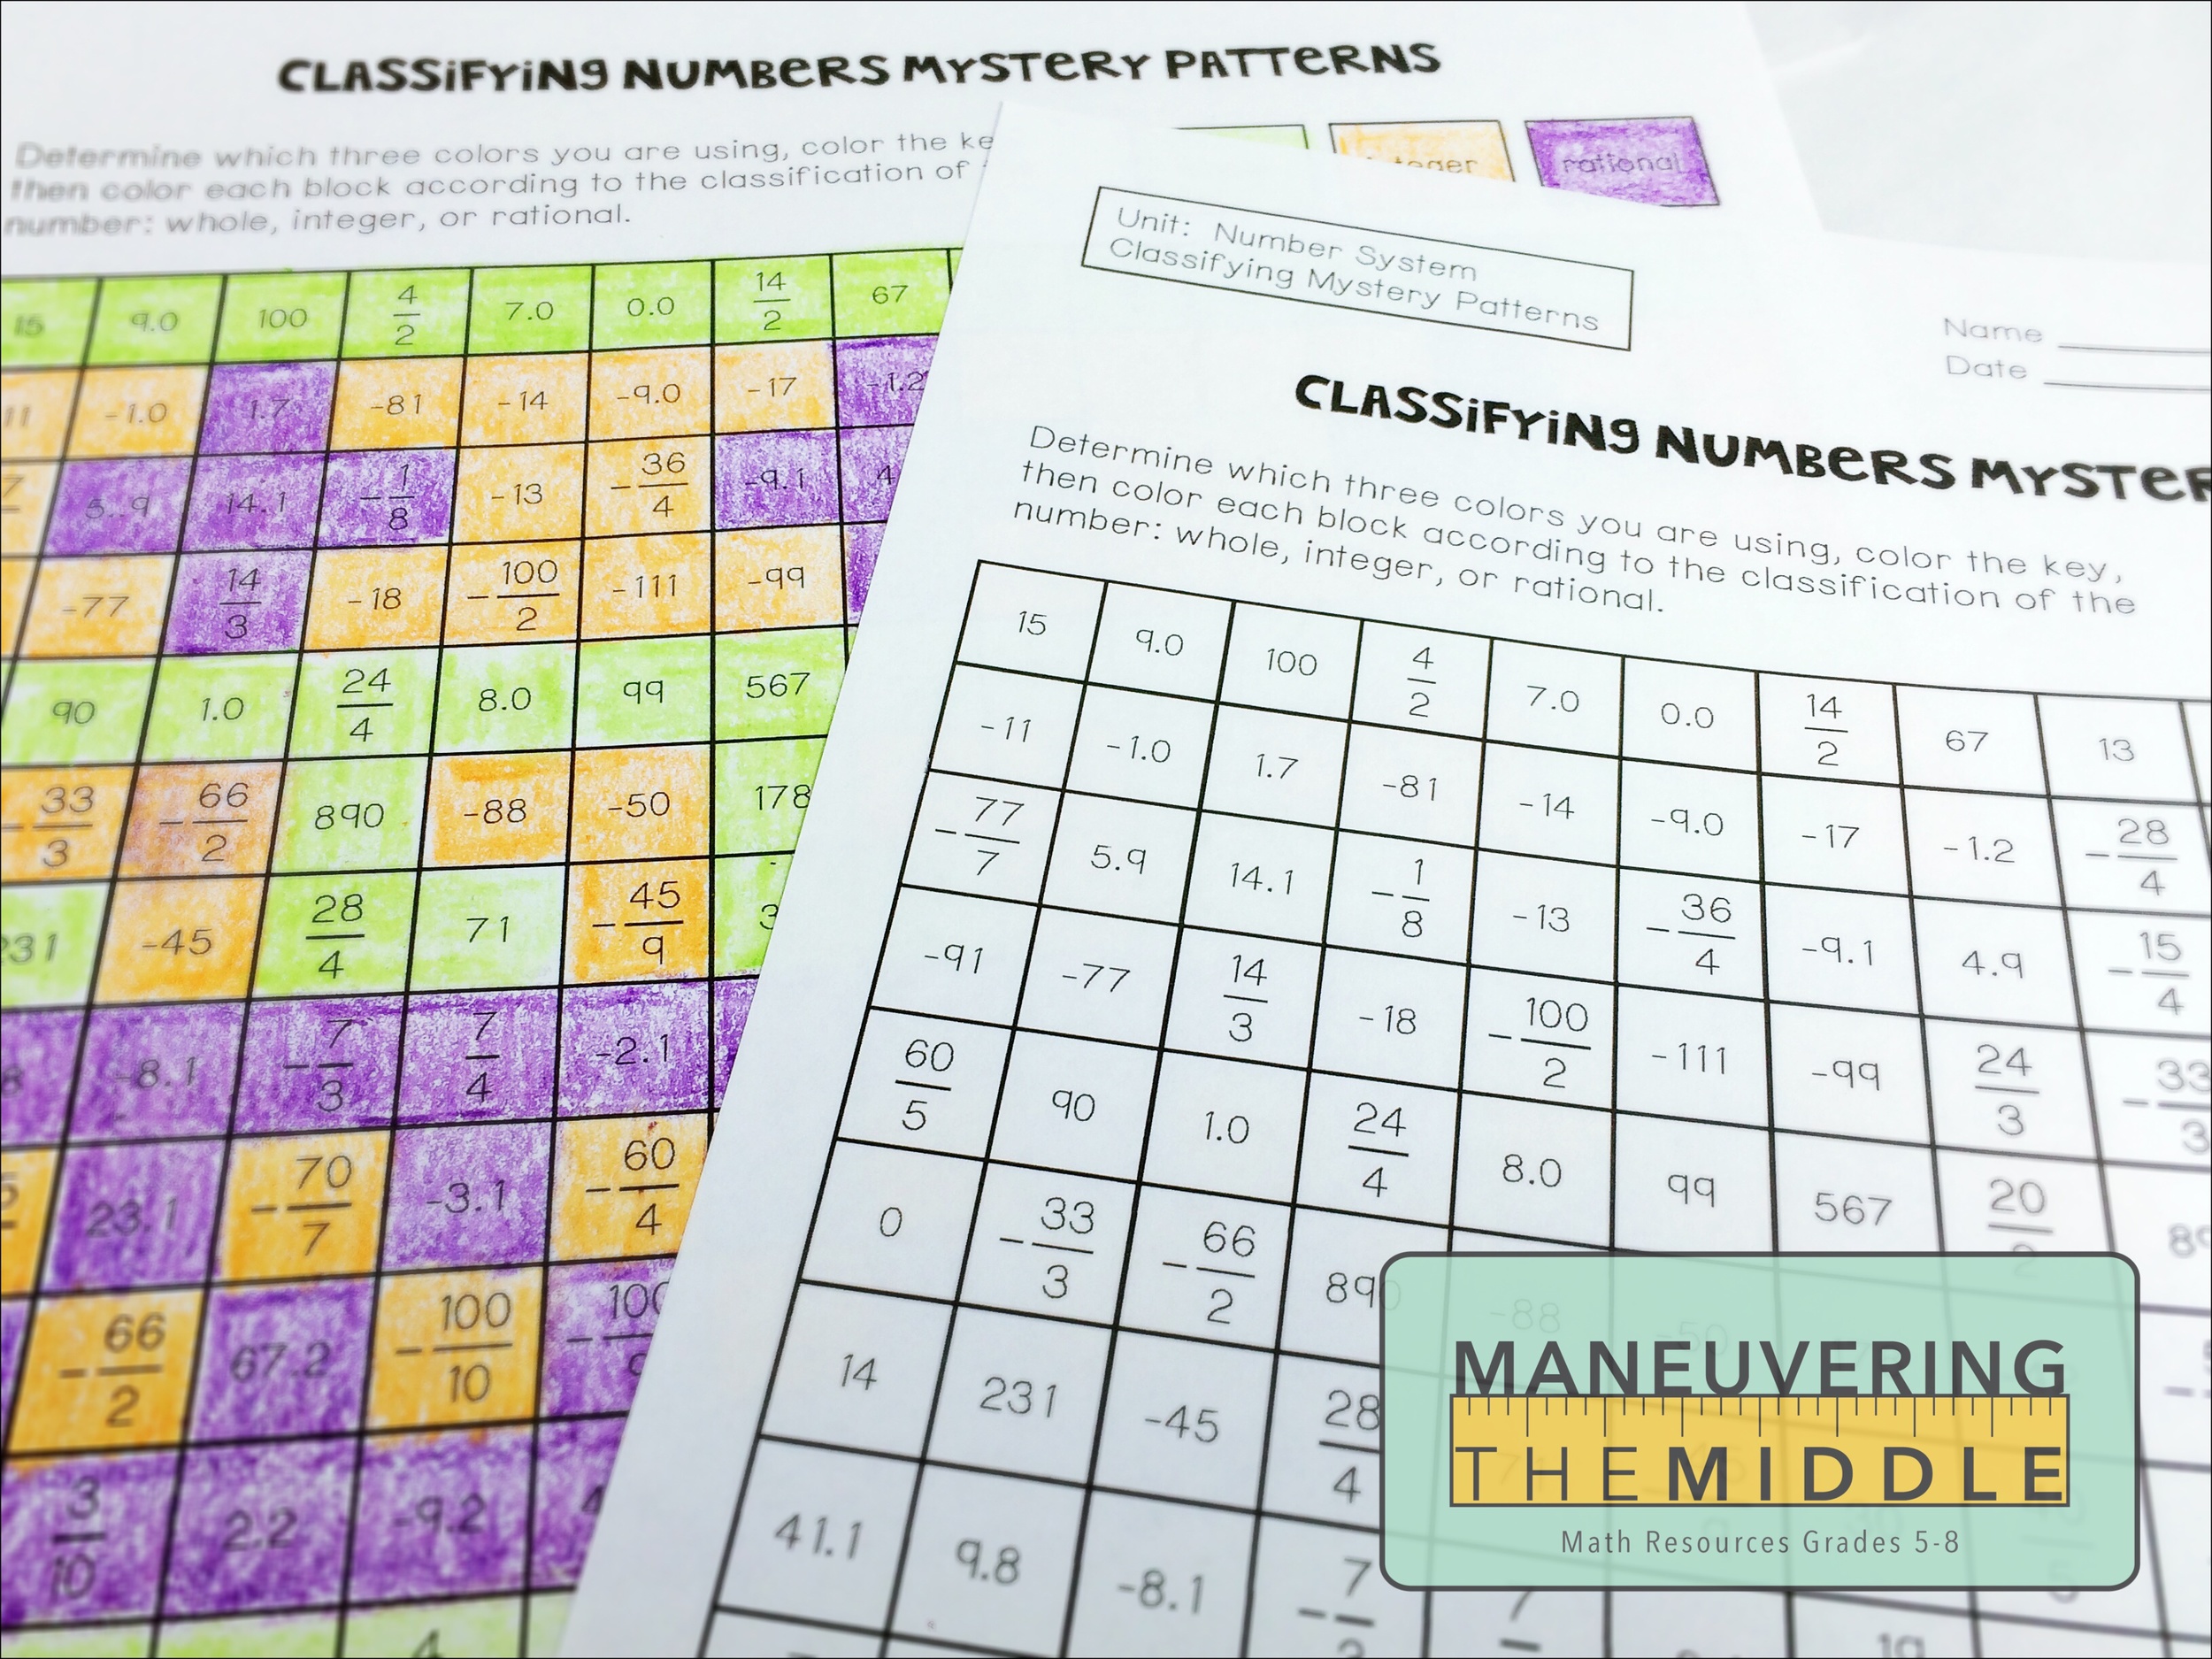 Classifying Numbers Mystery Patterns Worksheet Answers